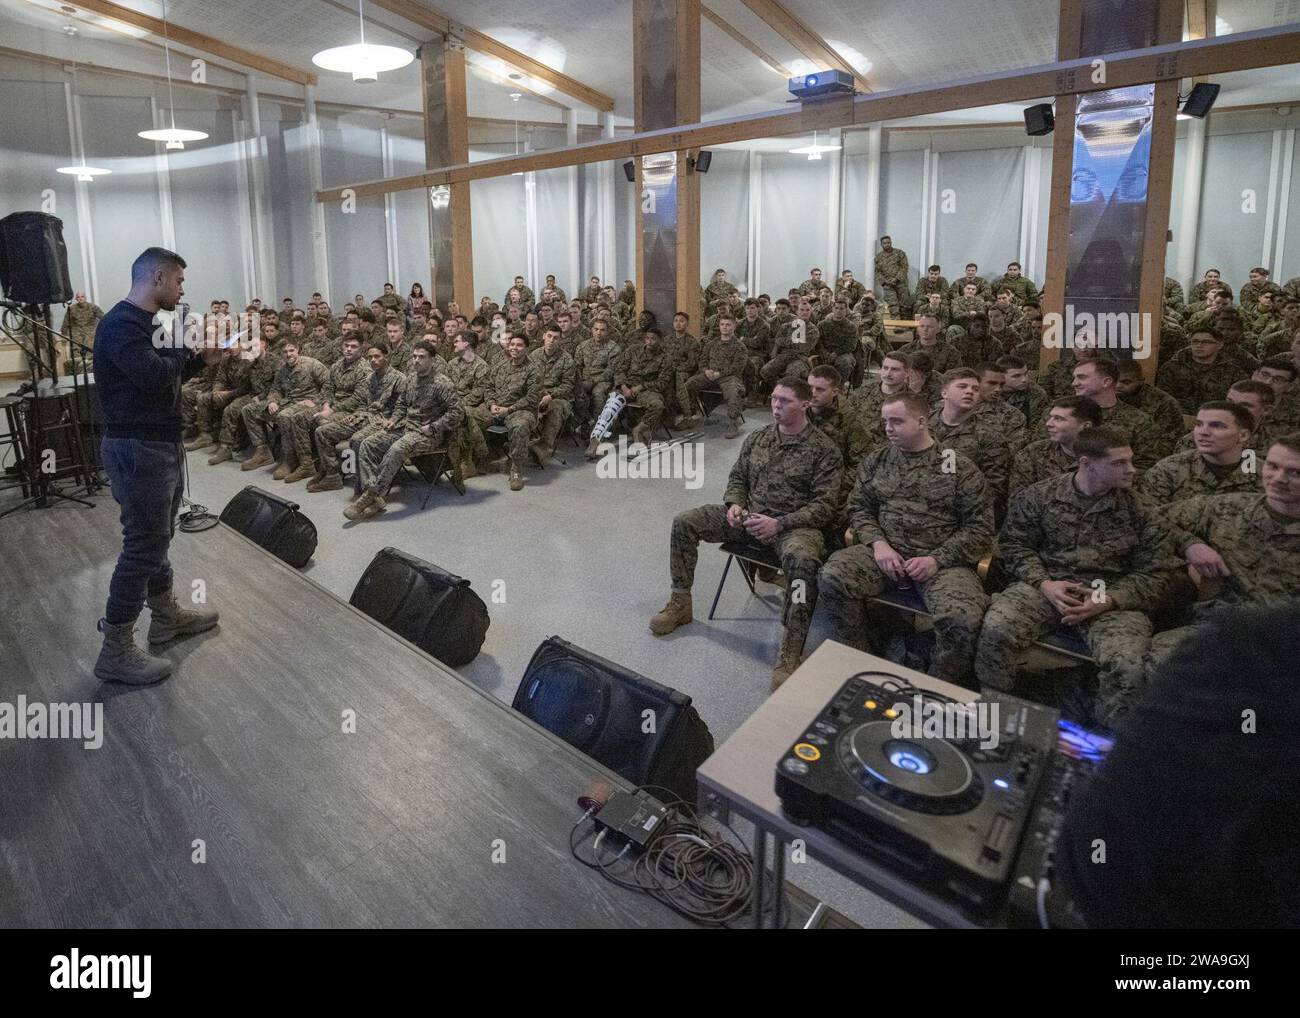 US military forces. Marine Corps Gen. Joe Dunford, chairman of the Joint Chiefs of Staff, meets with deployed service members in Vaernes, Norway Dec. 21, 2018. Dunford, along with USO entertainers, visited service members who are away from home during the holidays at various locations. This year’s entertainers include actors Milo Ventimiglia, Wilmer Valderrama, DJ J Dayz, Fittest Man on Earth Matt Fraser, 3-time Olympic Gold Medalist Shaun White, Country Music Singer Kellie Pickler, and comedian Jessiemae Peluso. (DoD photo by Navy Petty Officer 1st Class Dominique A. Pineiro) Stock Photo